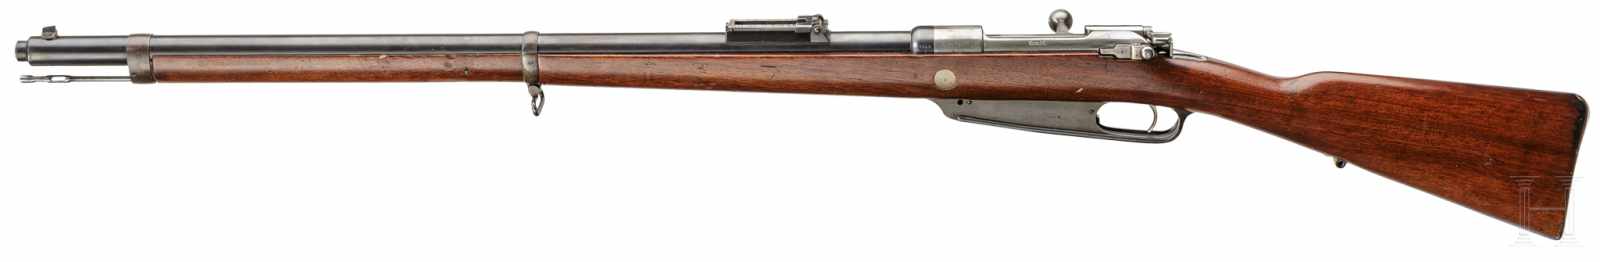 An Infantry Rifle M 88, OEWG - Image 2 of 3